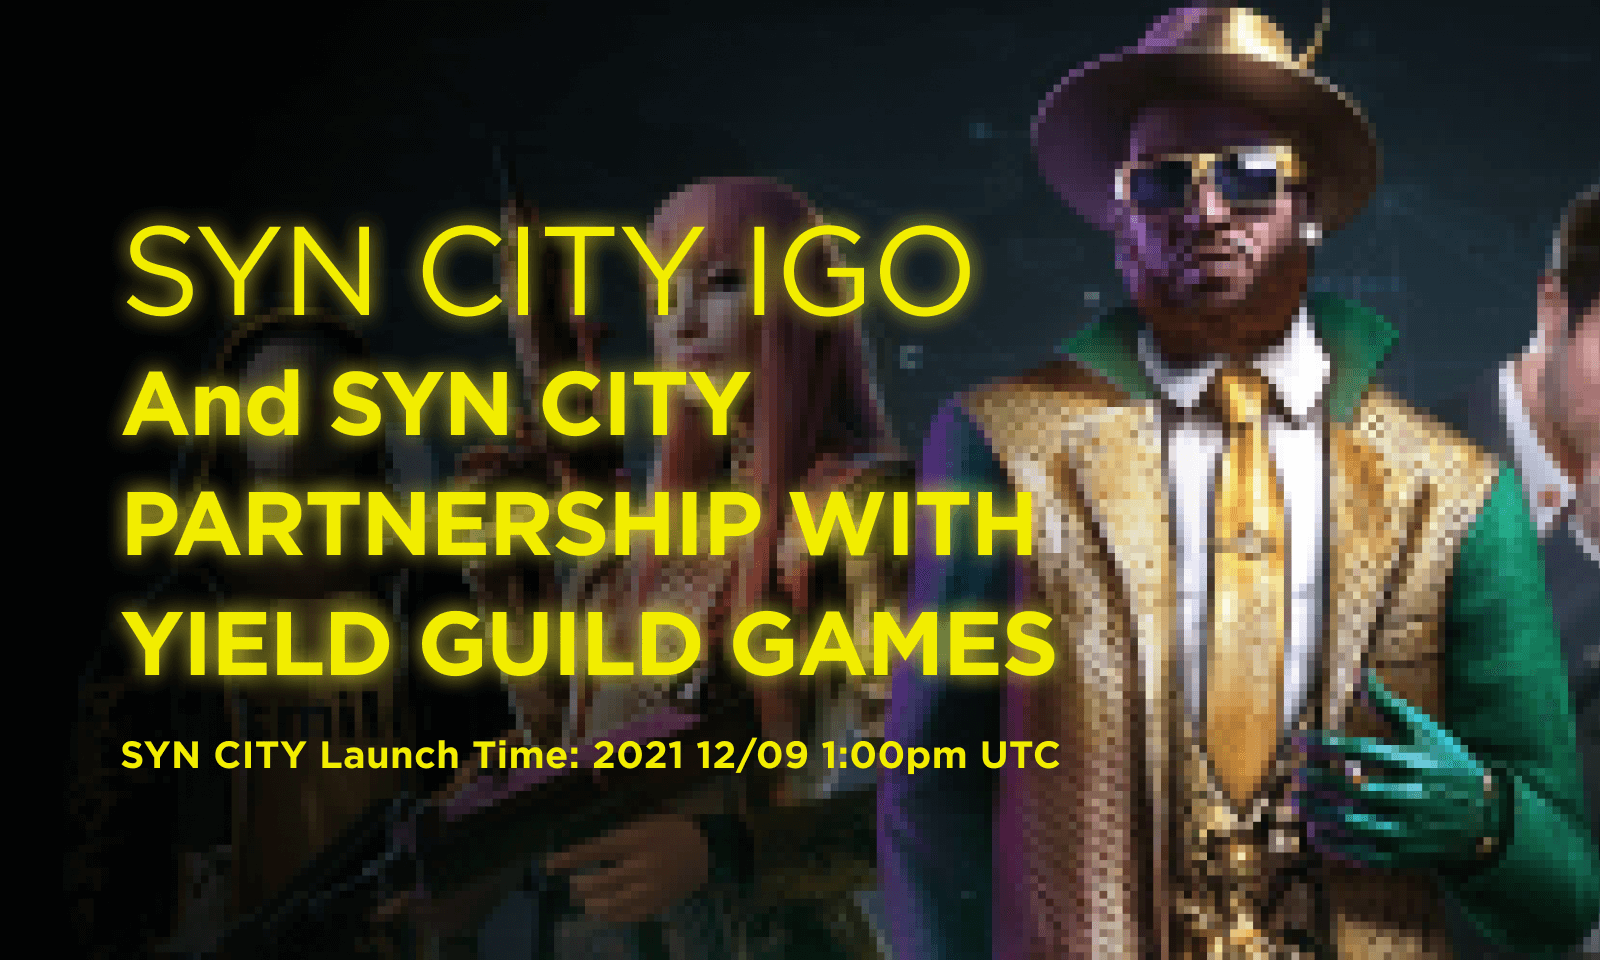 SYN CITY IGO and SYN CITY PARTNERSHIP WITH YIELD GUILD GAMES